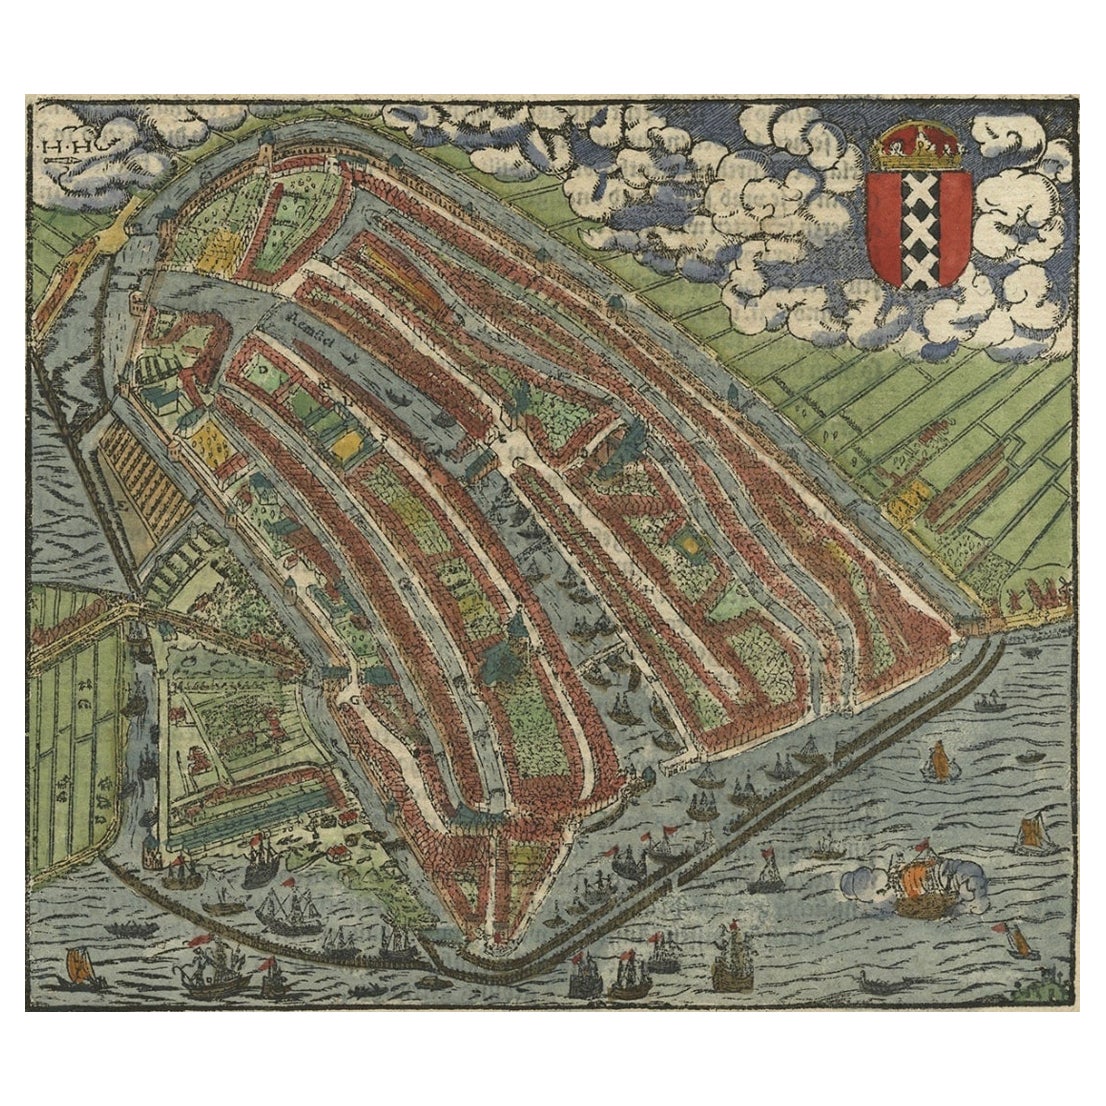 Old Original Hand-Colored Engraving of a Bird's-eye Plan of Amsterdam, ca.1580